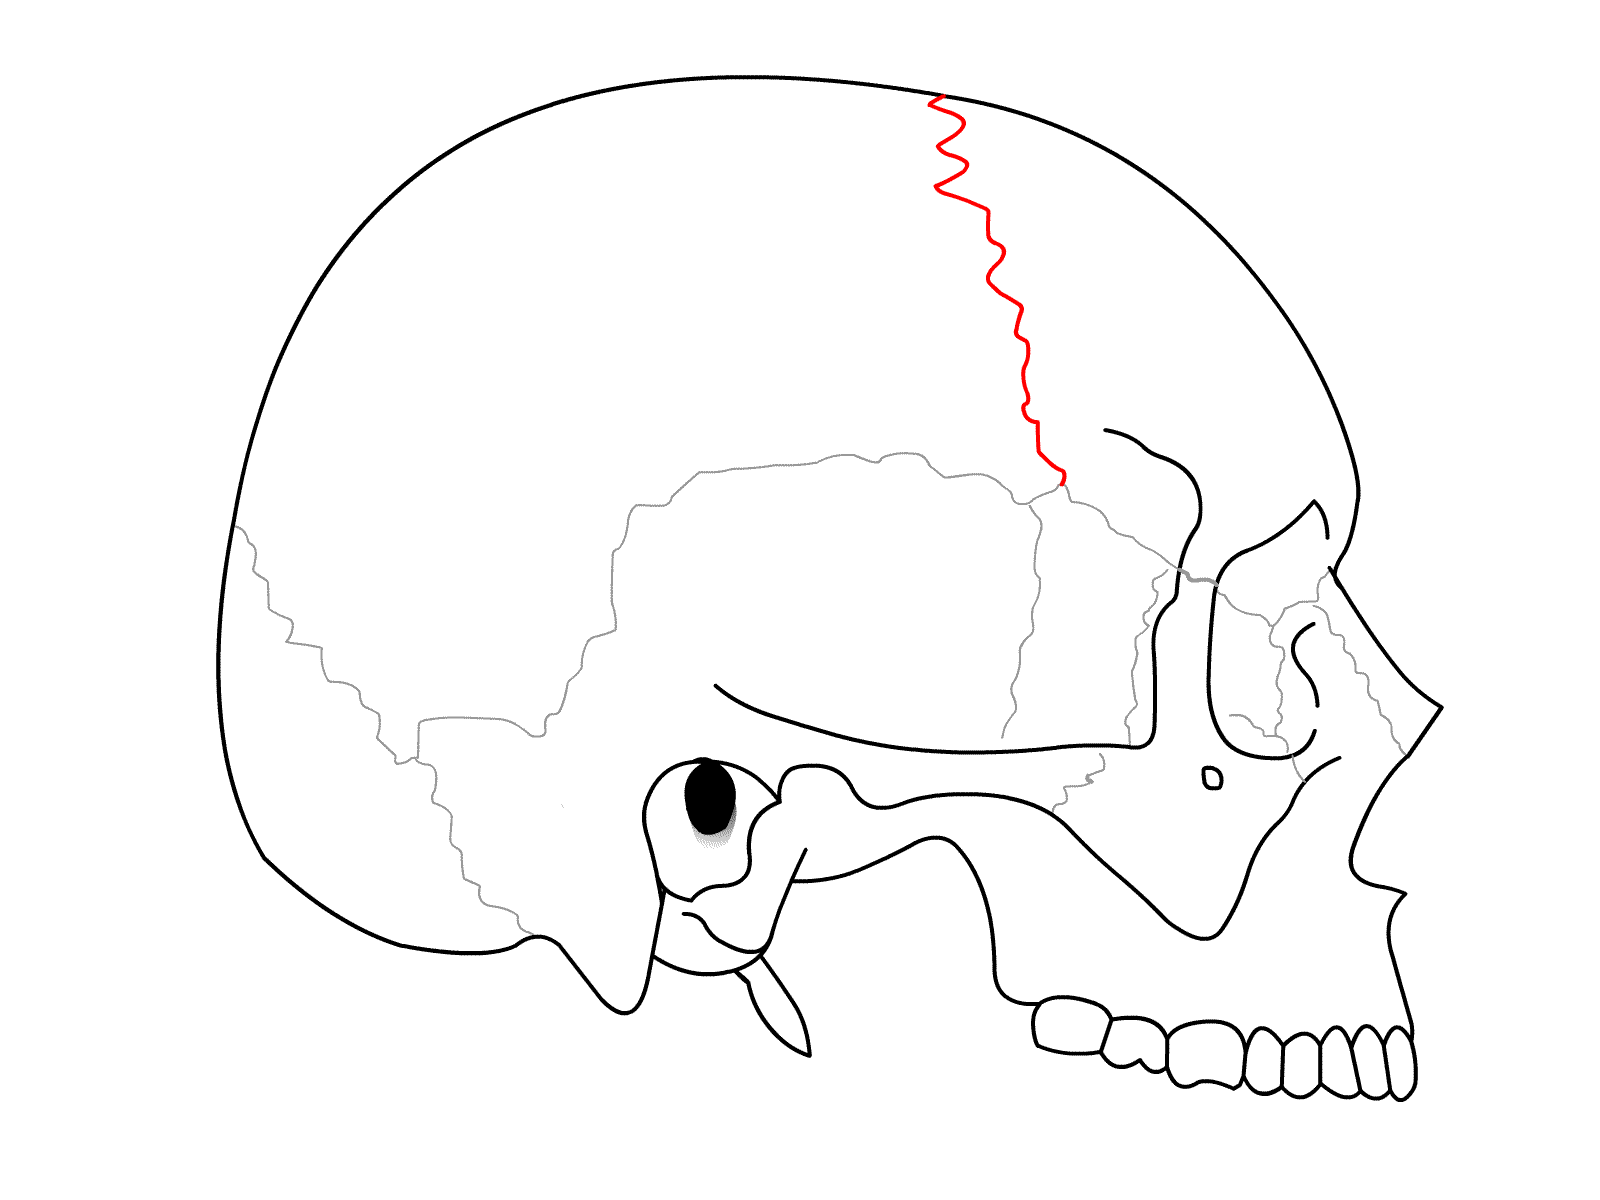 <p>The suture between the parietal and frontal bones of the skull</p>